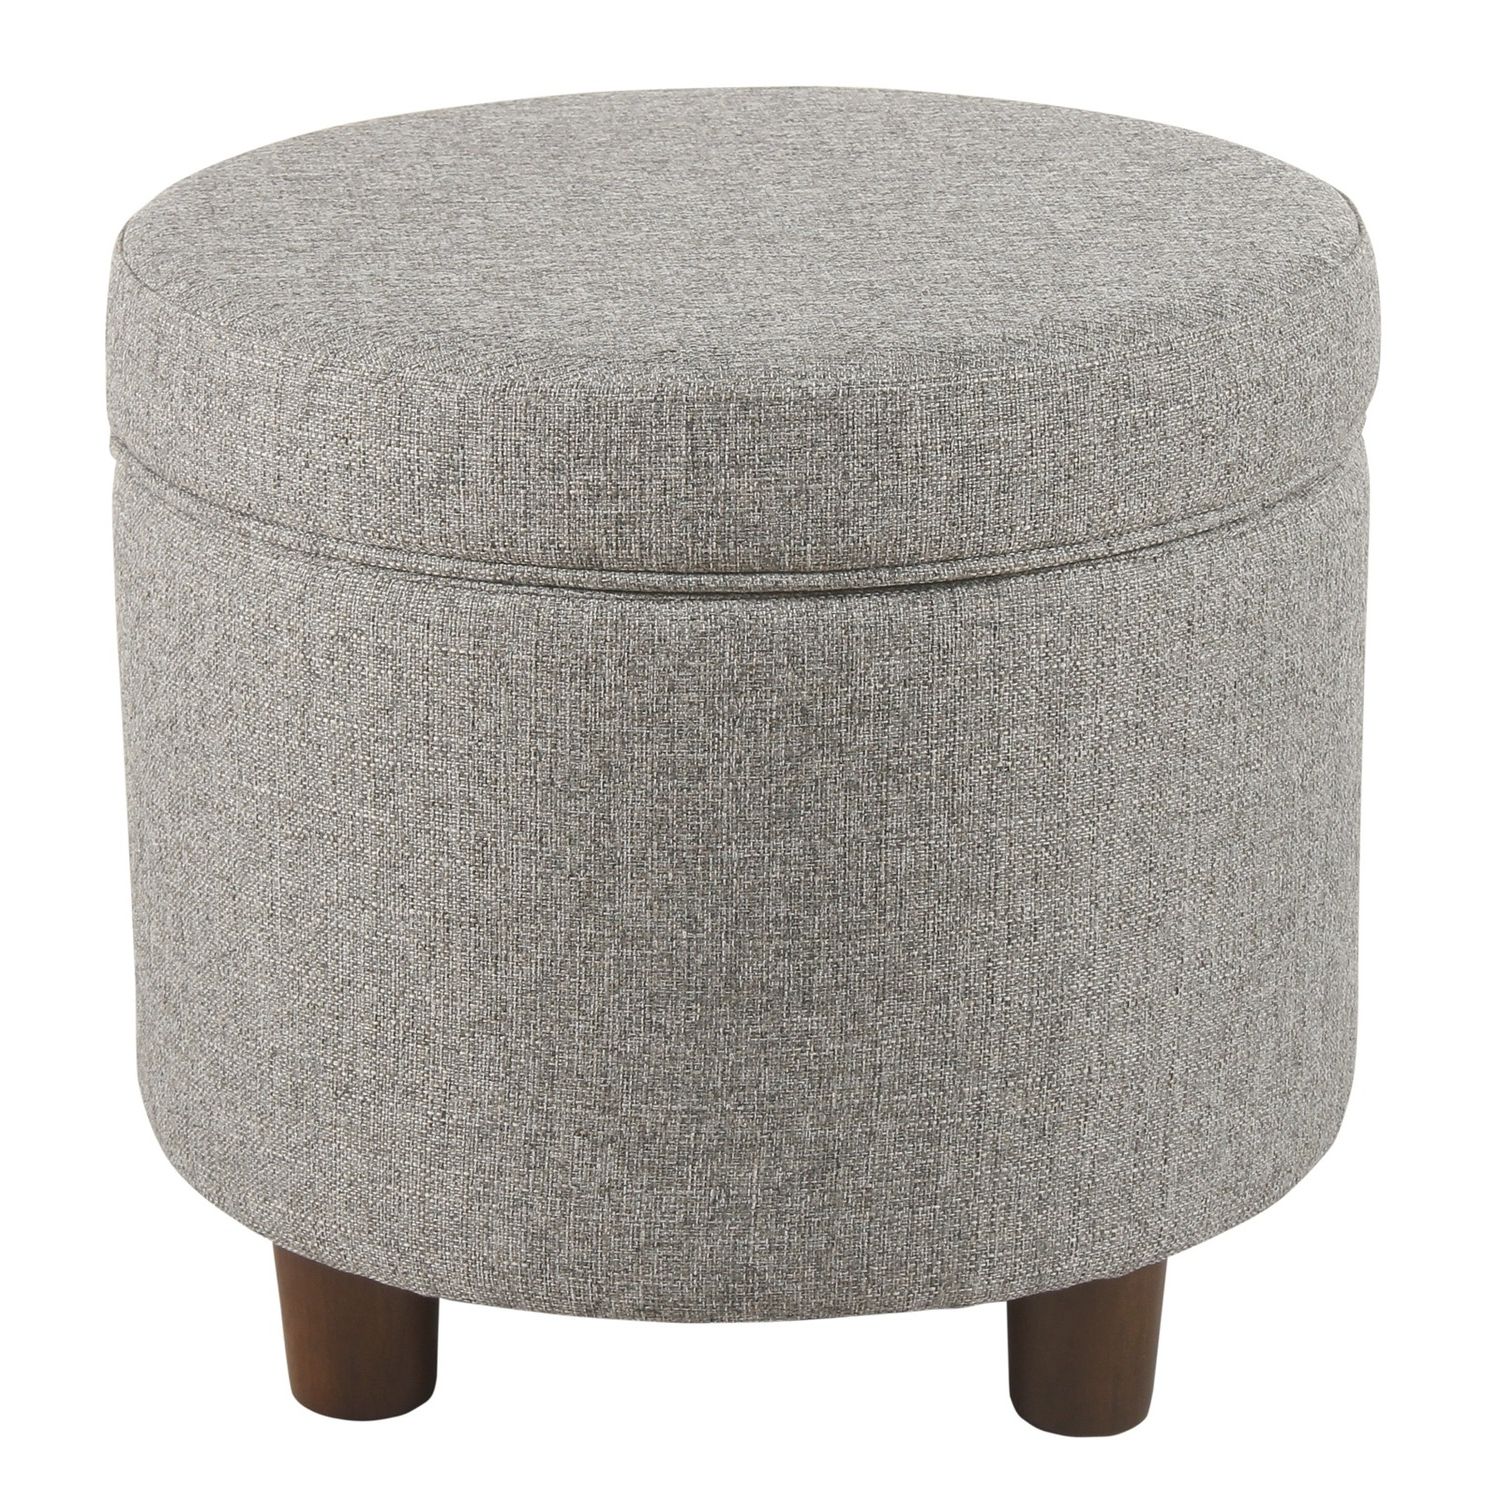 Most Popular Light Gray Fabric Tufted Round Storage Ottomans Within Benzara Fabric Upholstered Round Wooden Ottoman With Lift Off Lid (View 8 of 10)